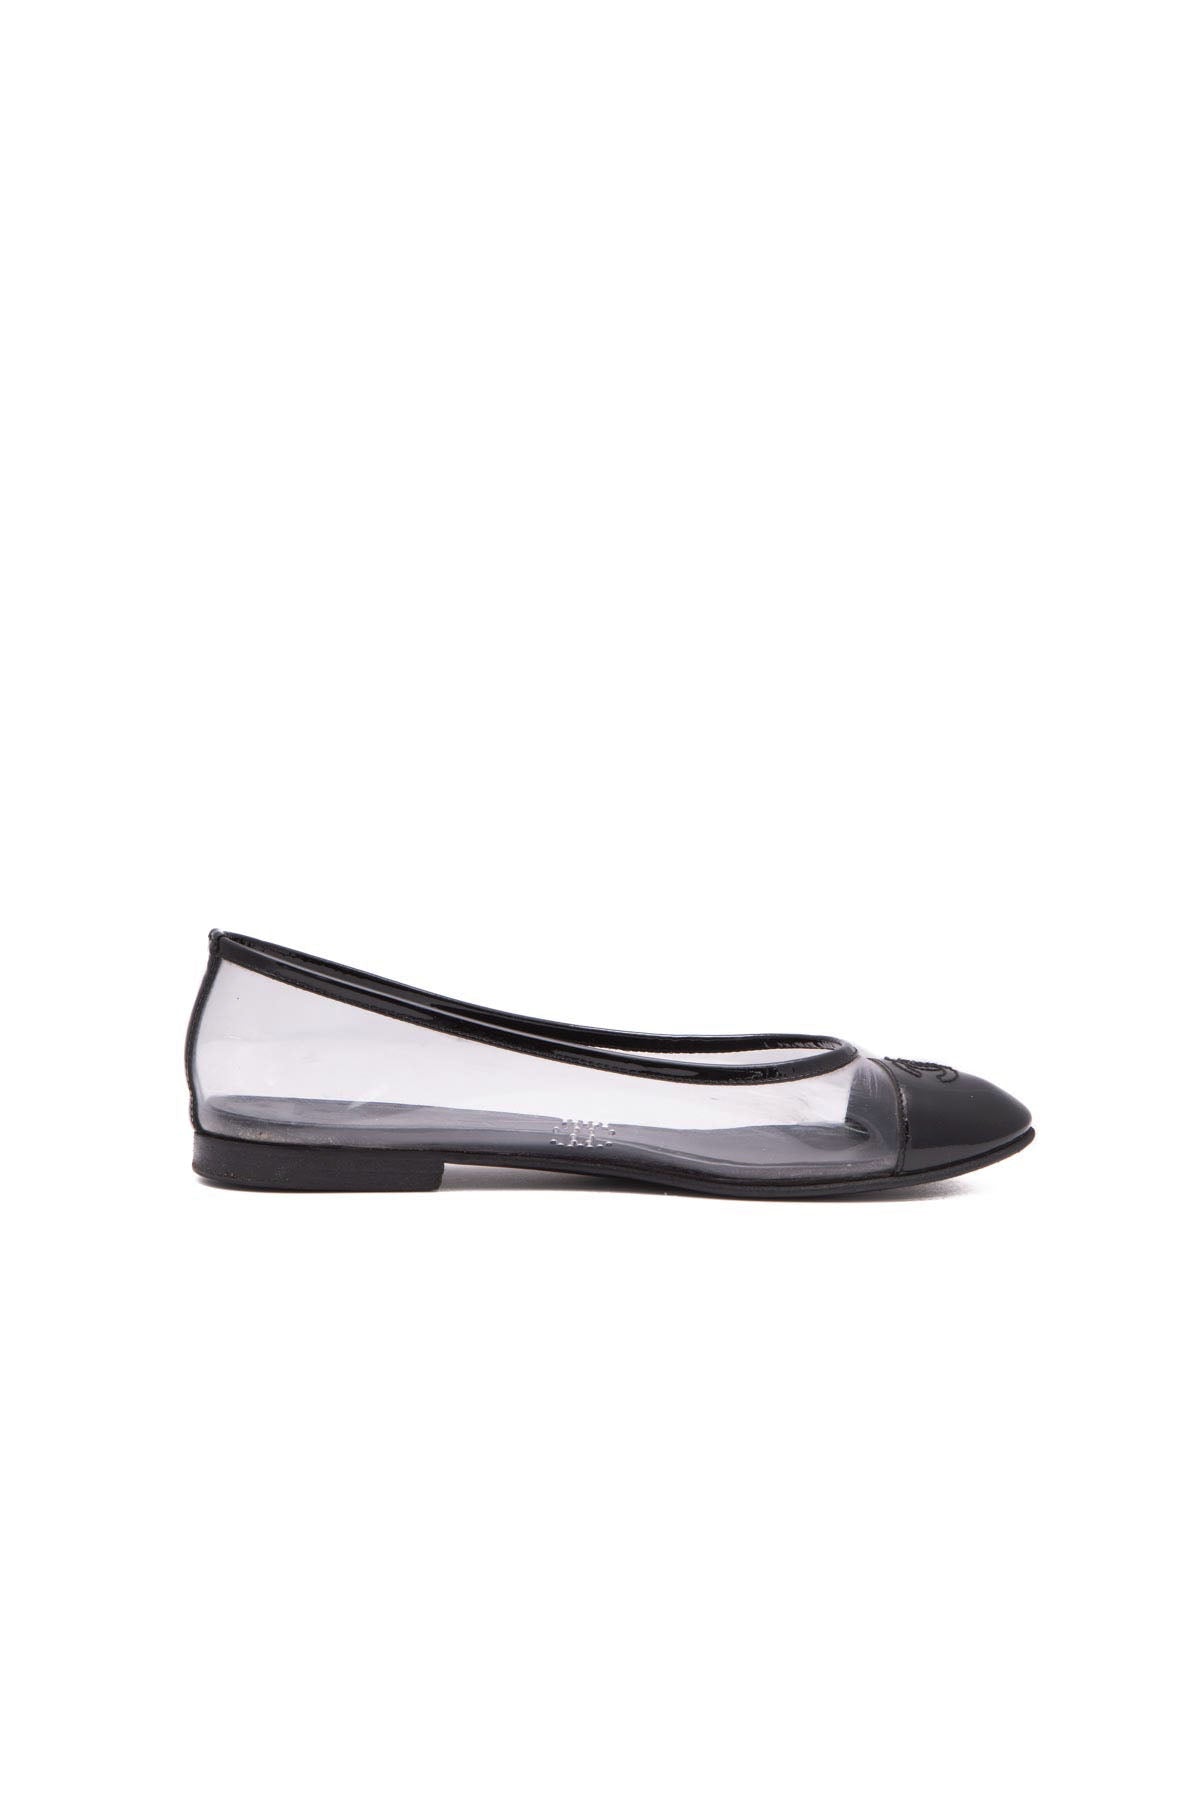 Chanel Clear CC Ballet Flats - Size 38.5